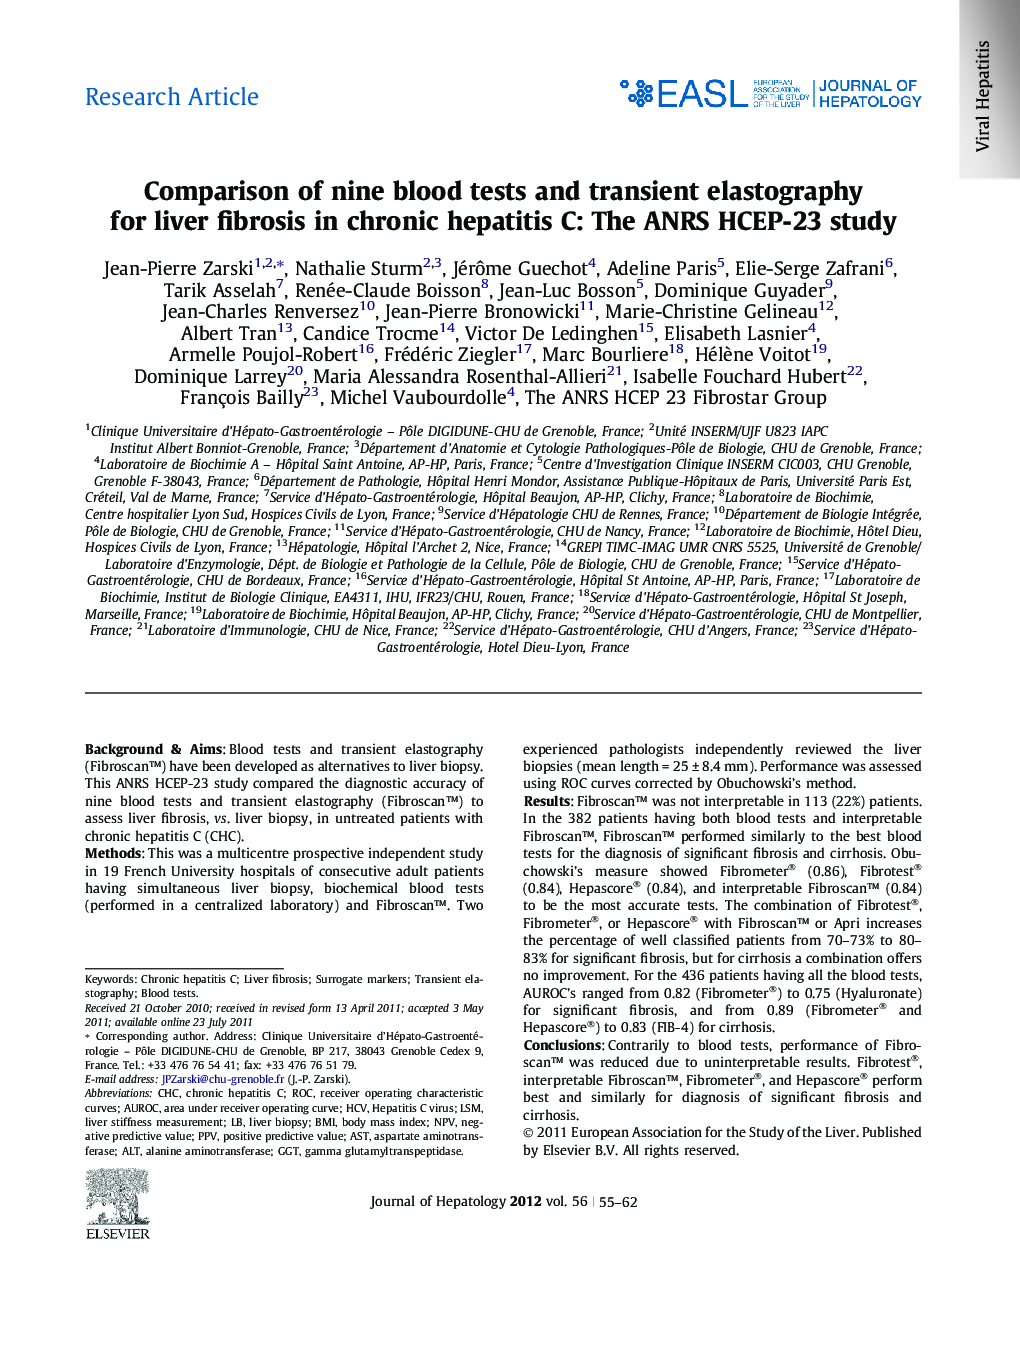 Research ArticleComparison of nine blood tests and transient elastography for liver fibrosis in chronic hepatitis C: The ANRS HCEP-23 study